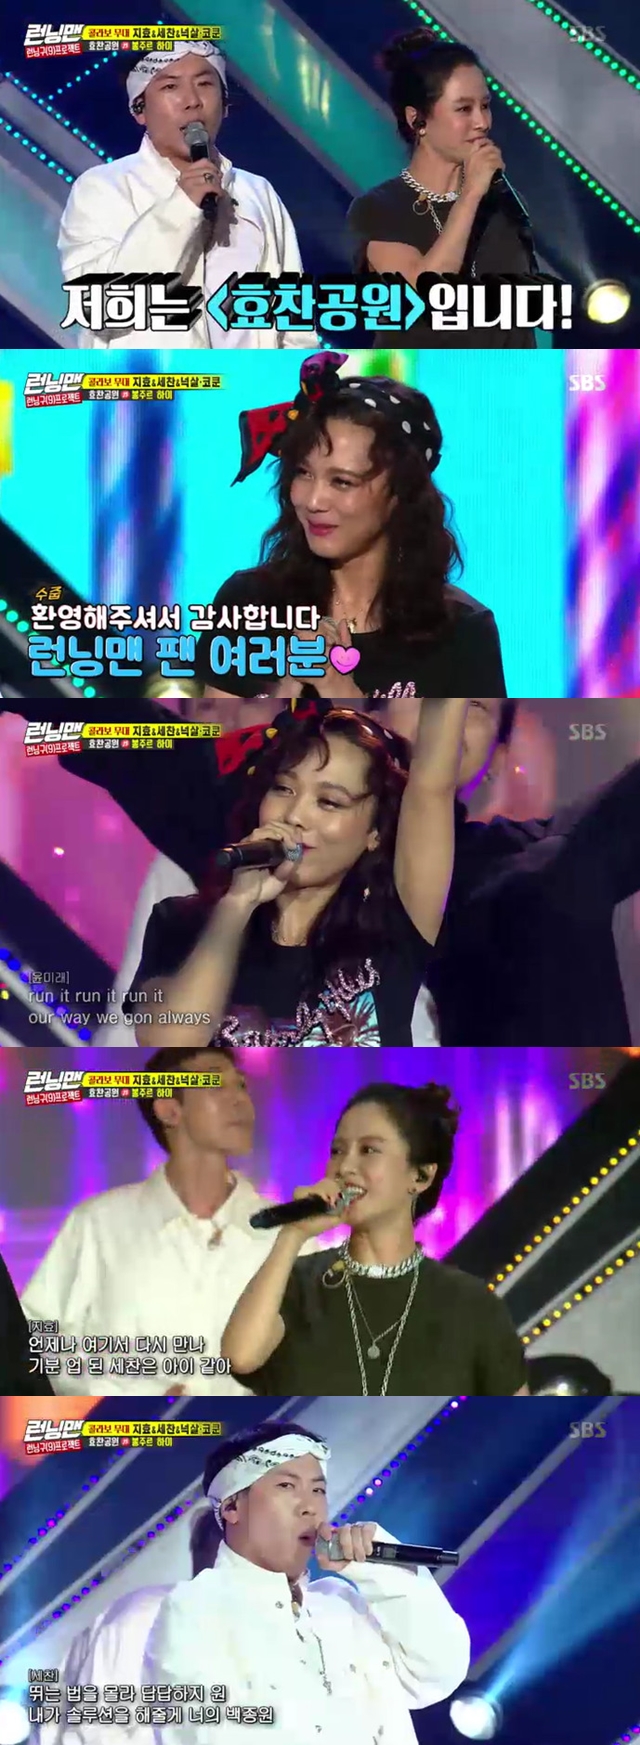 Yoon Mi-rae has appeared on Running Man.On SBS Running Man, which was broadcast on September 22, Collabo stage with the top artists in Korea followed last week.Song Ji-hyo Yang Se-chan, who made his second Collabo stage with Knocks and Kodkunst on the day, raised his curiosity by foreseeing that there is a huge hyd card ahead of the stage.The teams main director was Kodkunst.Prior to the recording, Kodkunst was afraid that no matter how good you are, you will go to the basic number three, and unlike Yang Se-chan, who is better than you think, the nervous Song Ji-hyo had to continue re-recording.Suddenly, he headed to the recording studio himself, and sadly tried to relax Song Ji-hyo.After many twists and turns, Hyochan Park team came on stage to present Bongjour High. Song Ji-hyo appeared in the middle of the lift, raising the atmosphere with poor but authentic lyrics.Runner Runner, who was wrapped in veil when the atmosphere peaked, appeared; Runner Runner was none other than Yoon Mi-rae.Yoon Mi-rae performed a wonderful stage with huge cheers; everyone was impressed with the hip-hop queen Class, which overwhelmed the stage at the same time as she appeared.bak-beauty